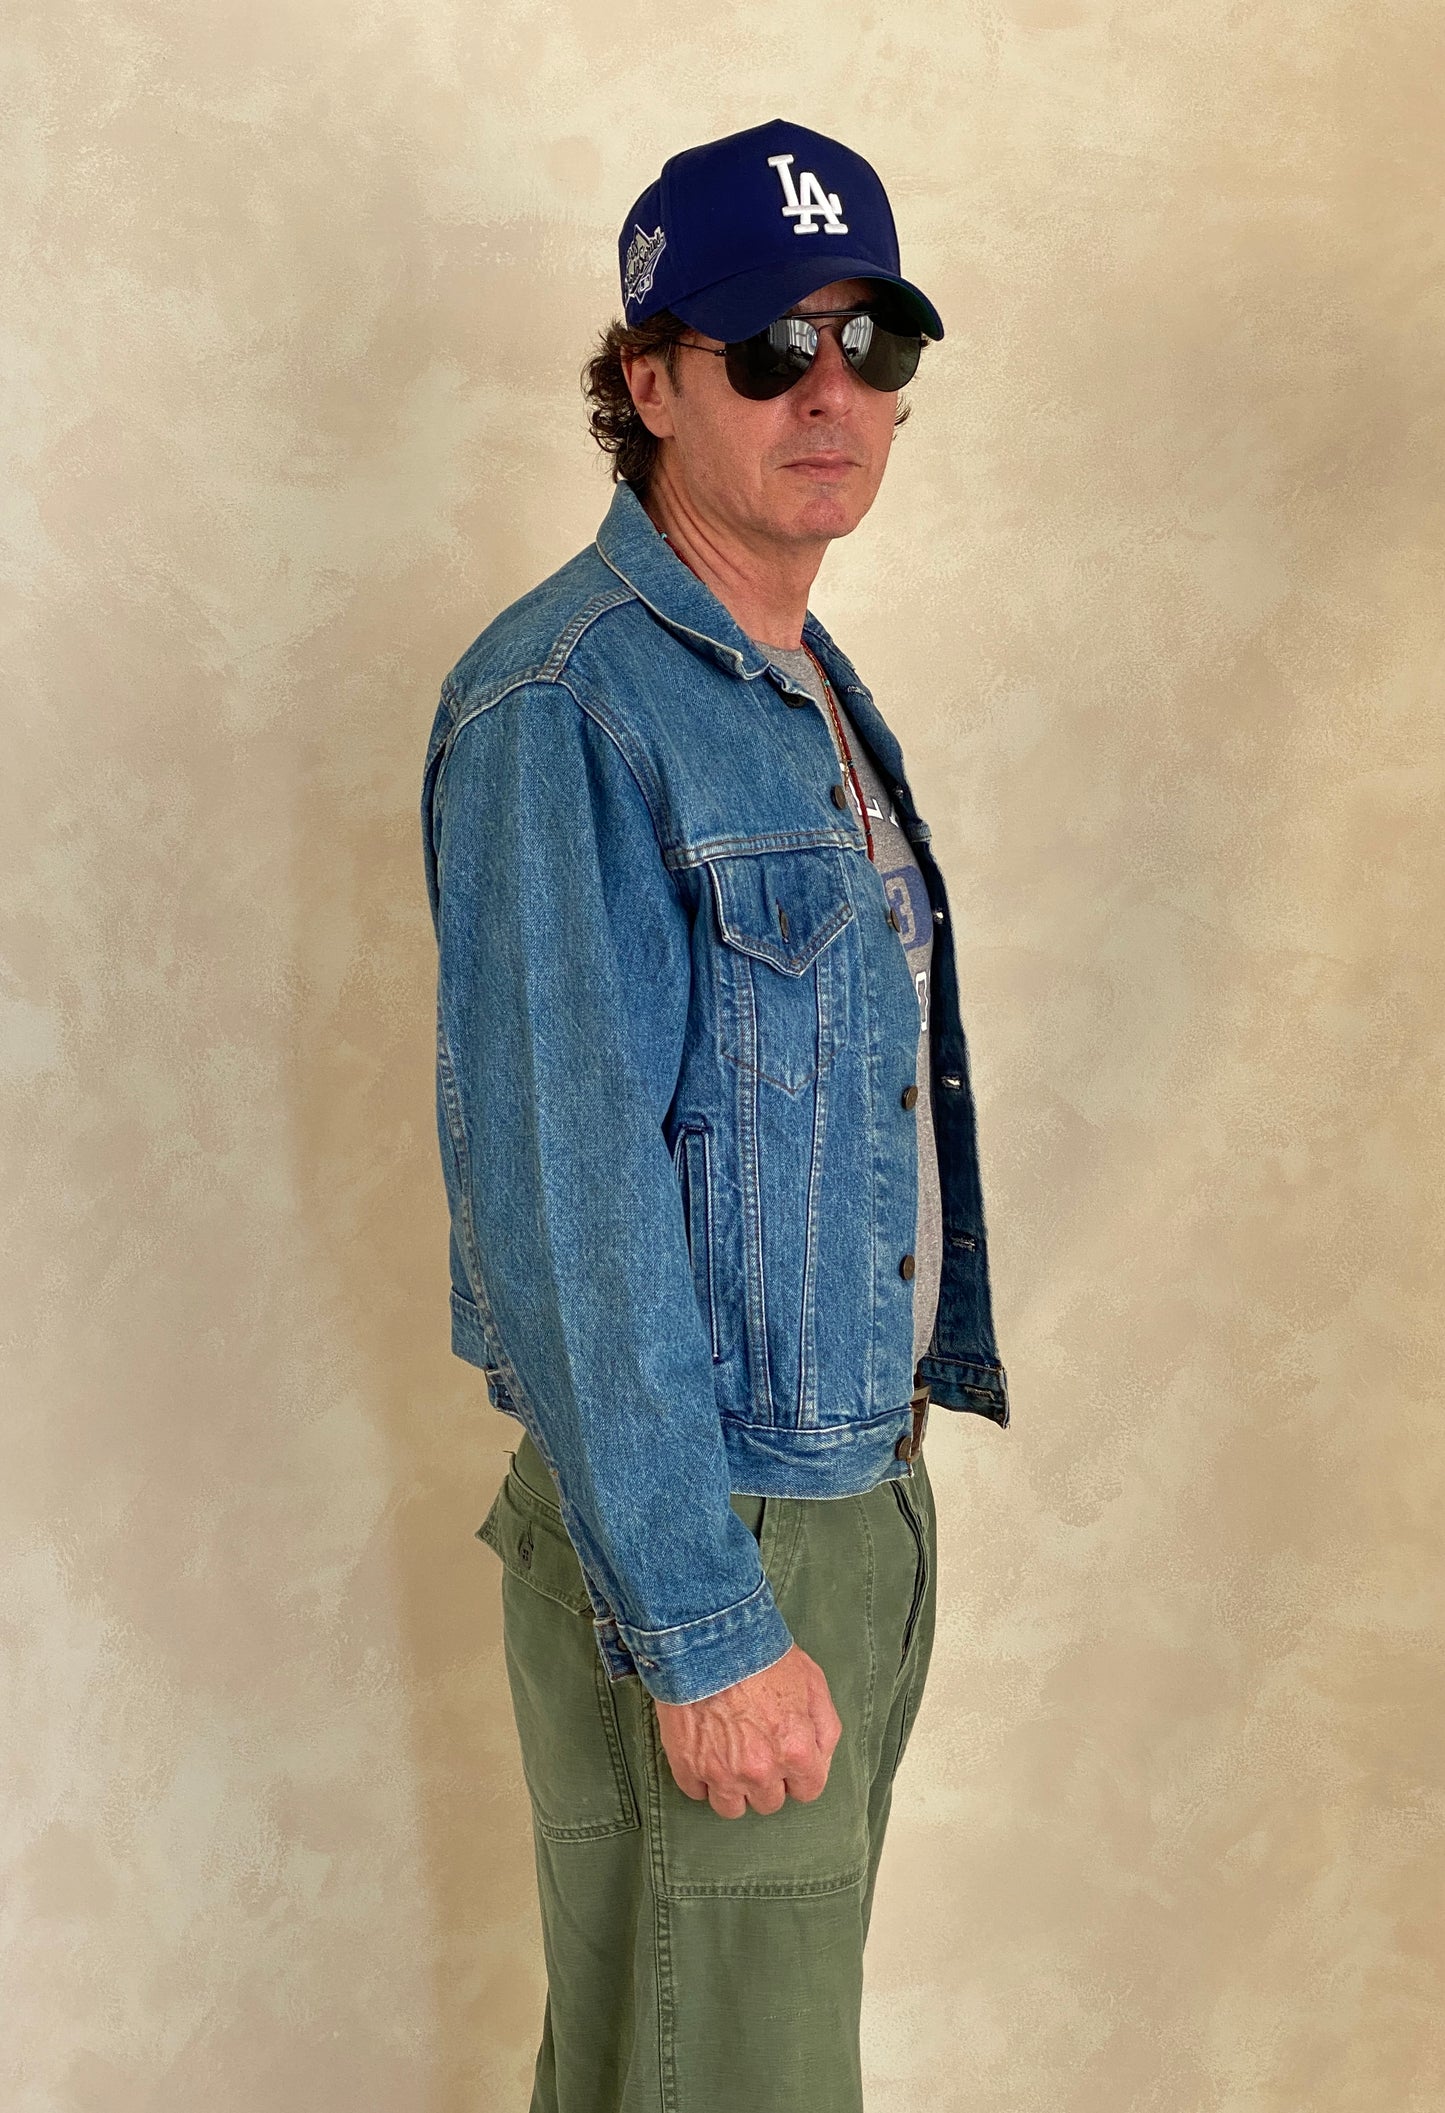 Vintage 80s Levis jacket, size 44US / 54EU, with four pockets, made in the USA.